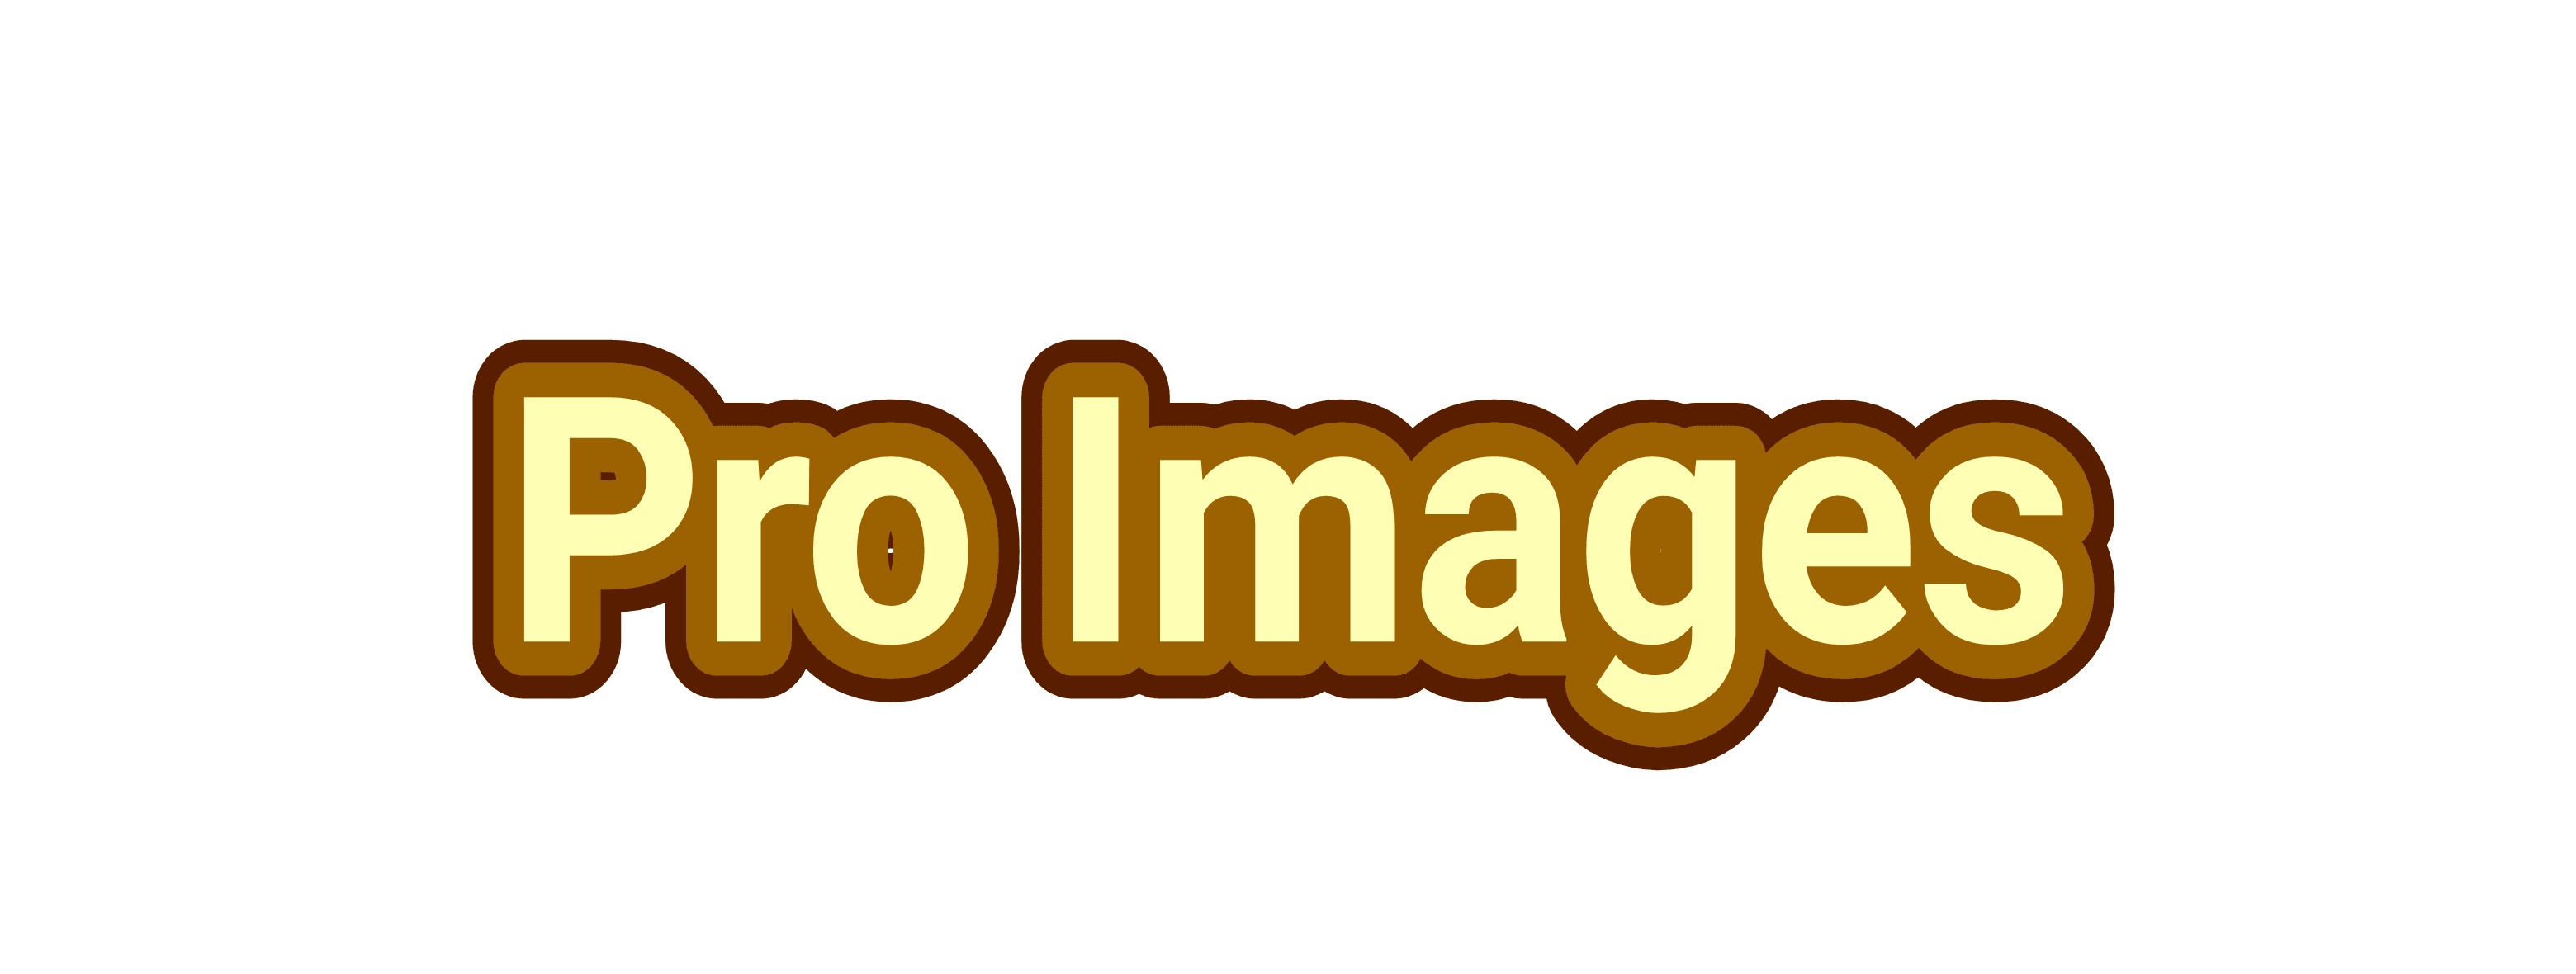 Pro Images Collection OpenSea